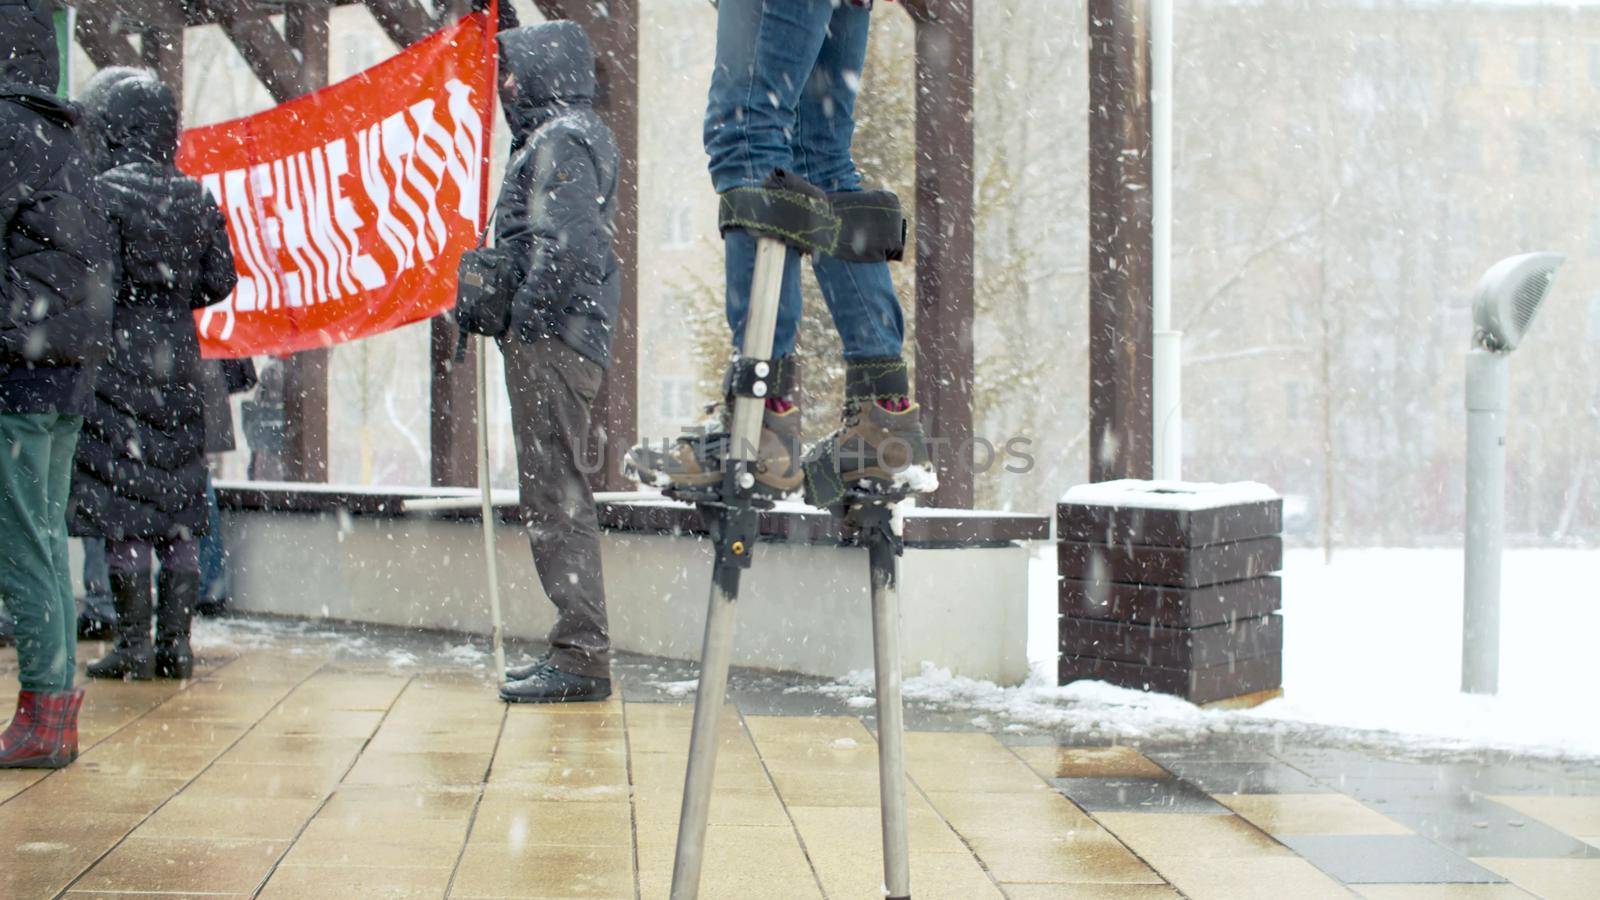 Girl on stilts under the snowfall at a protest rally against construction. Make Your Voice Heard